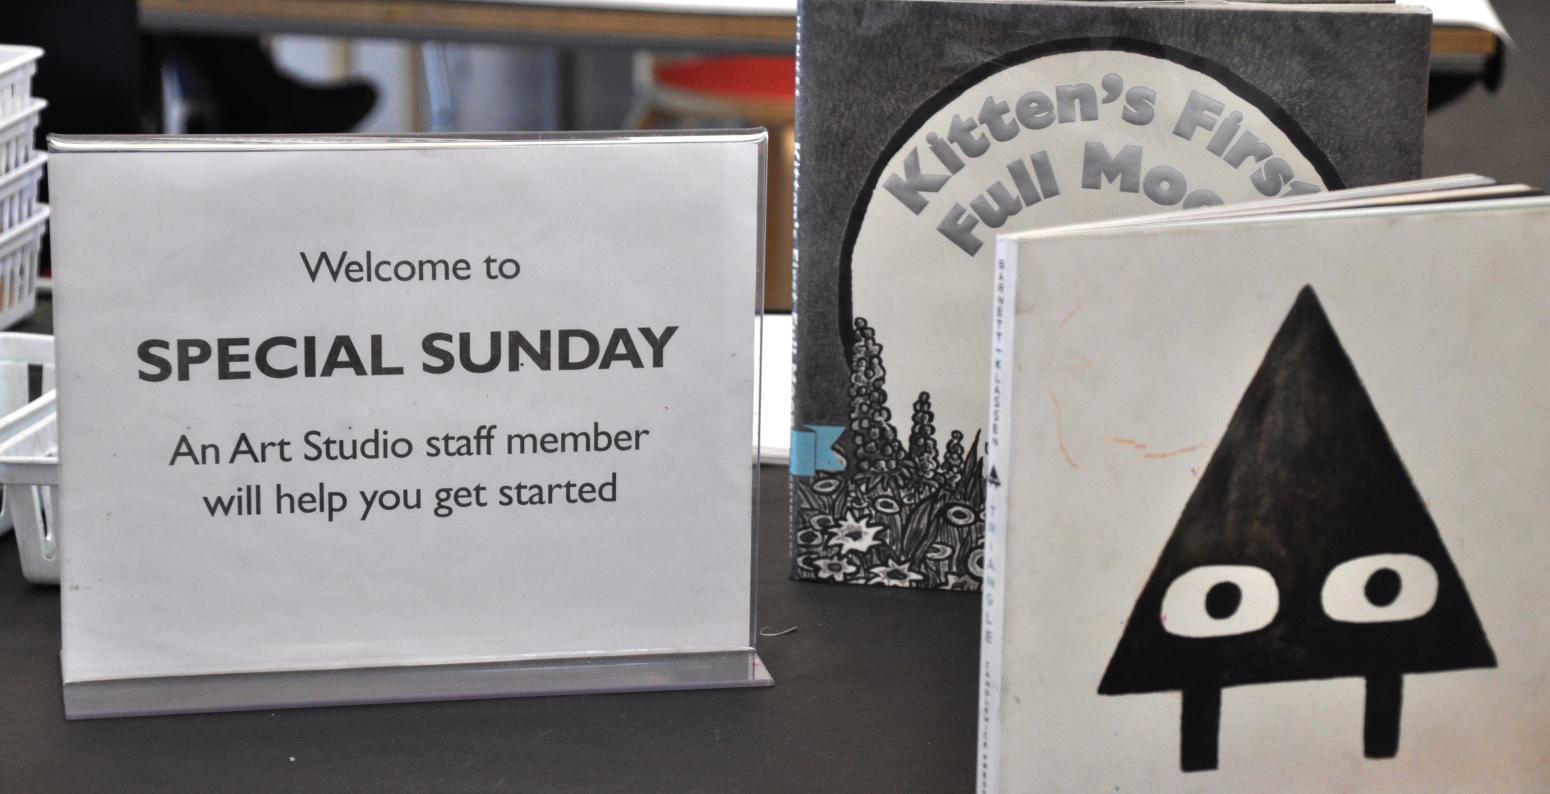 A sign welcoming guests to participate in a Special Sunday project and two picture books, Triangle, and Kitten's First Moon.